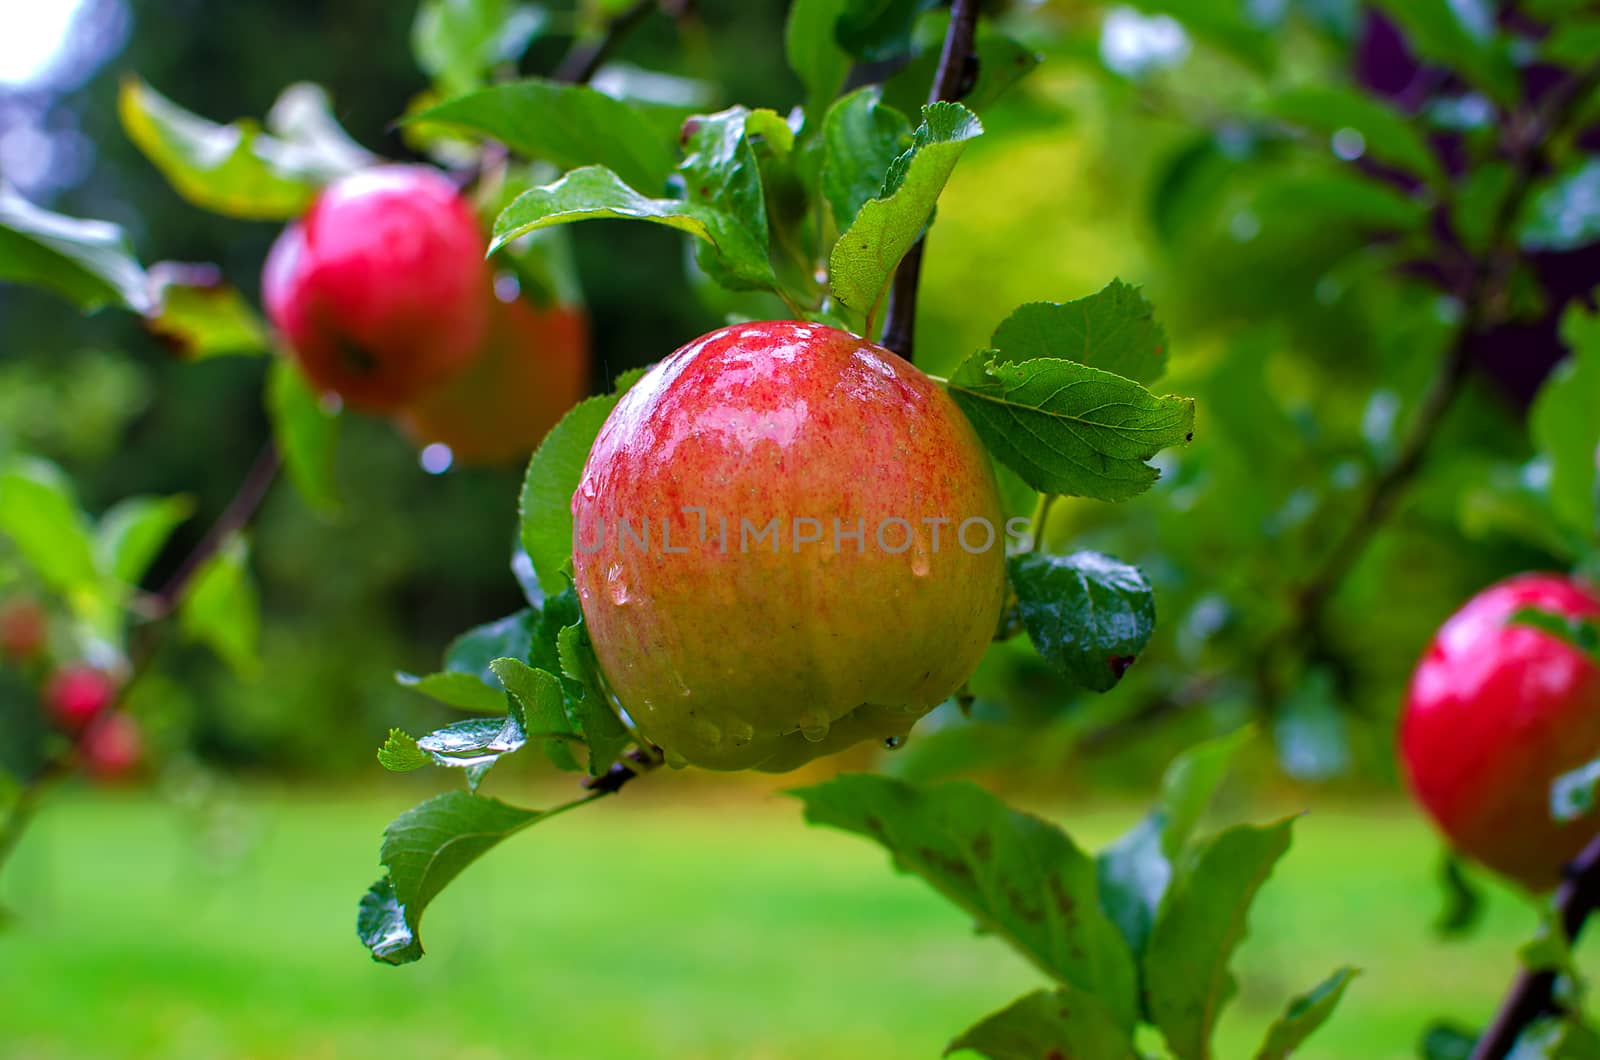 Shiny delicious apples hanging from a tree branch in an apple orchard by KajaNi